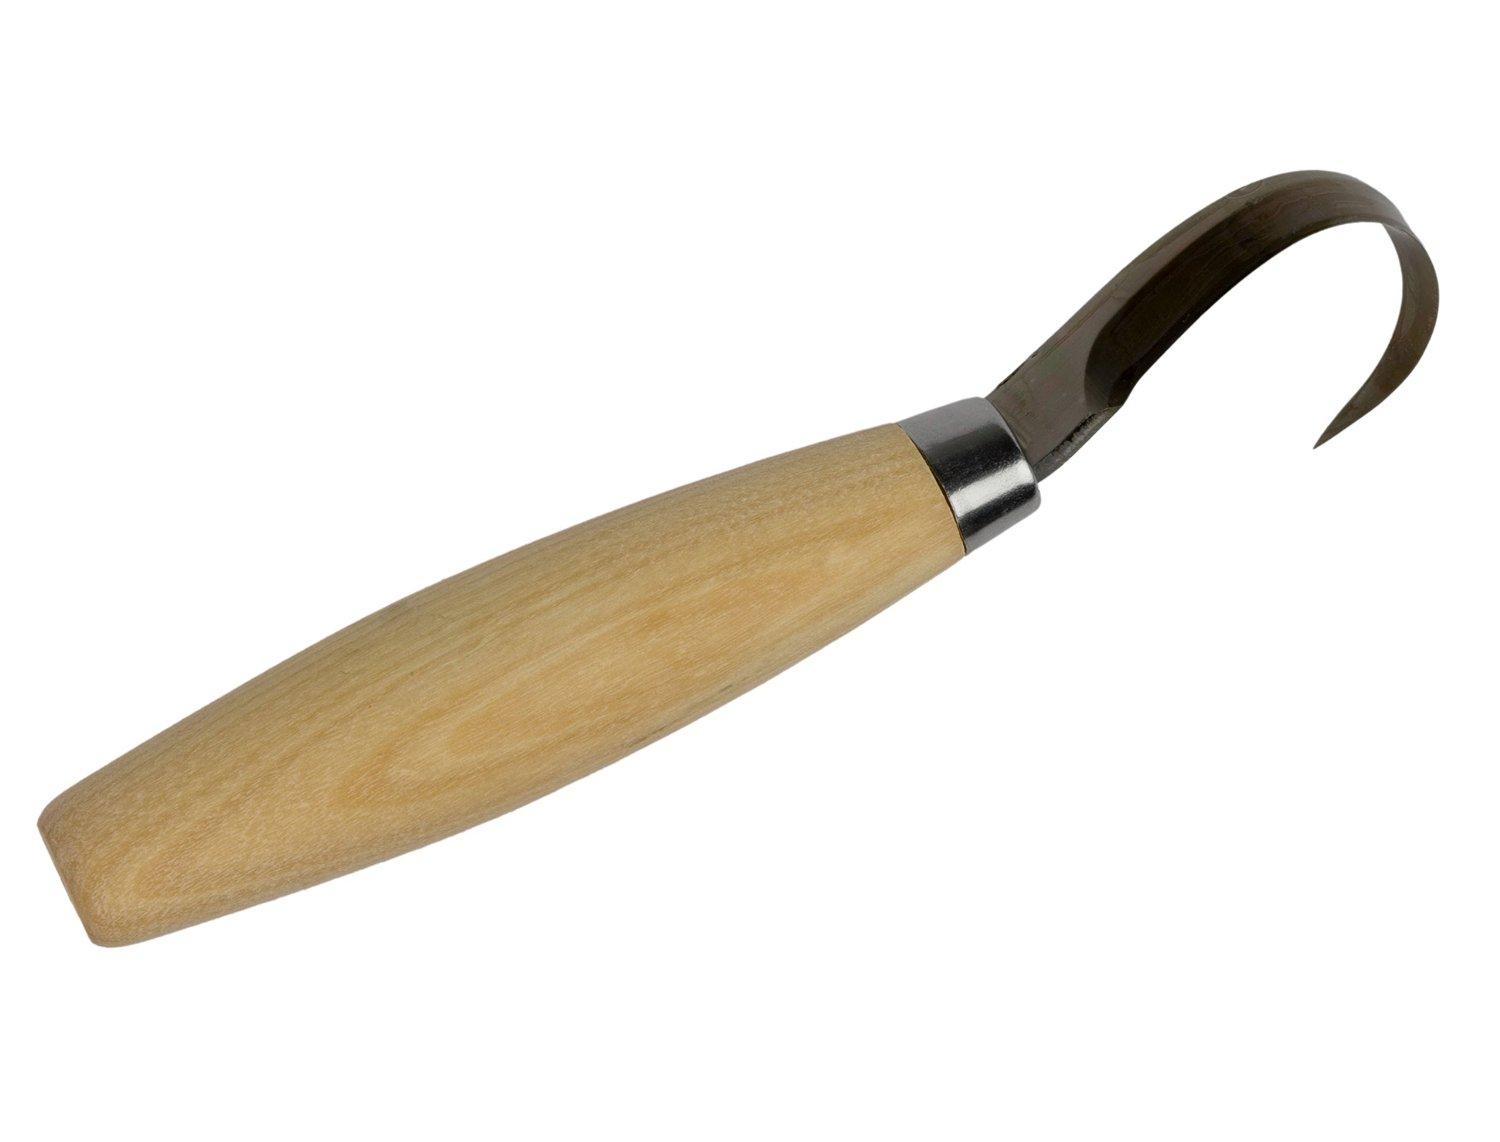 Wood Carving Knife Reviews - 2019's Best Wood Carving Knives